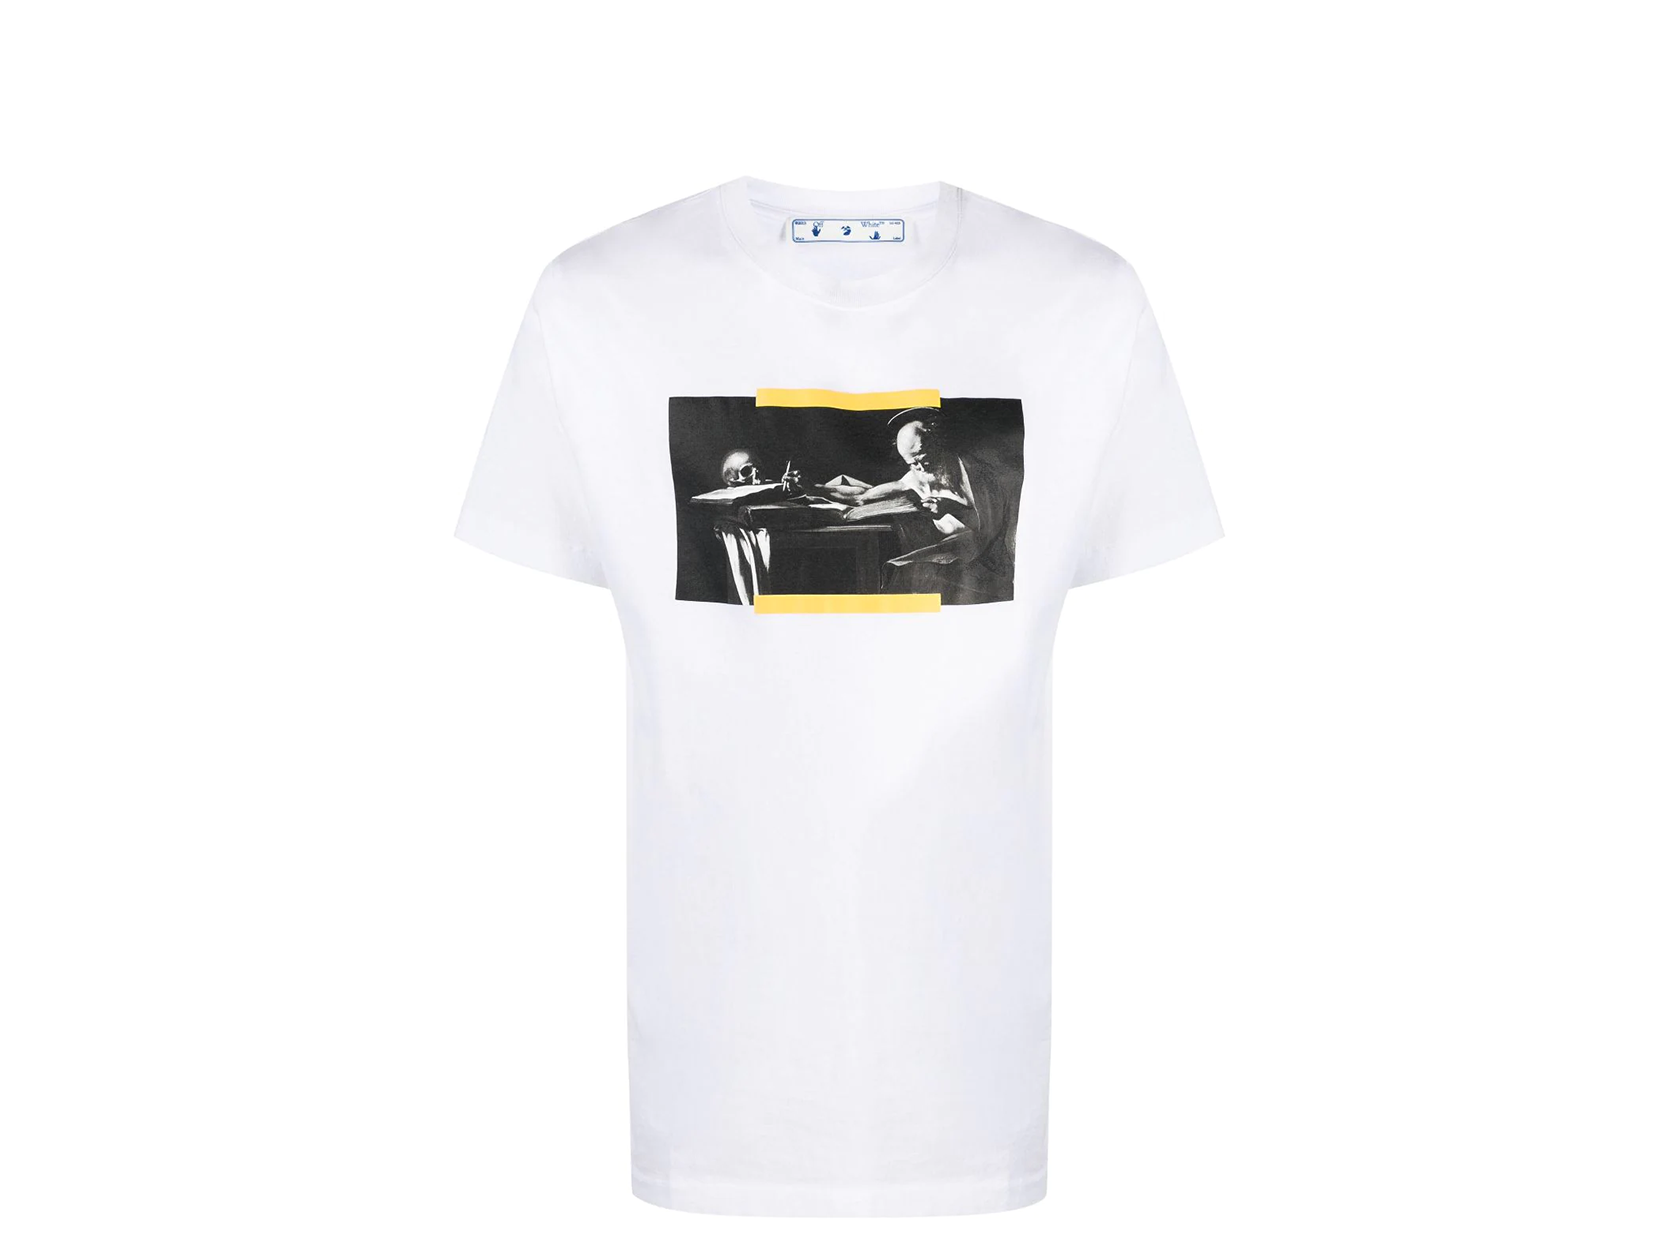 Double Boxed hoodie 229.99 Off-White Caravaggio Print White Yellow T Shirt Double Boxed